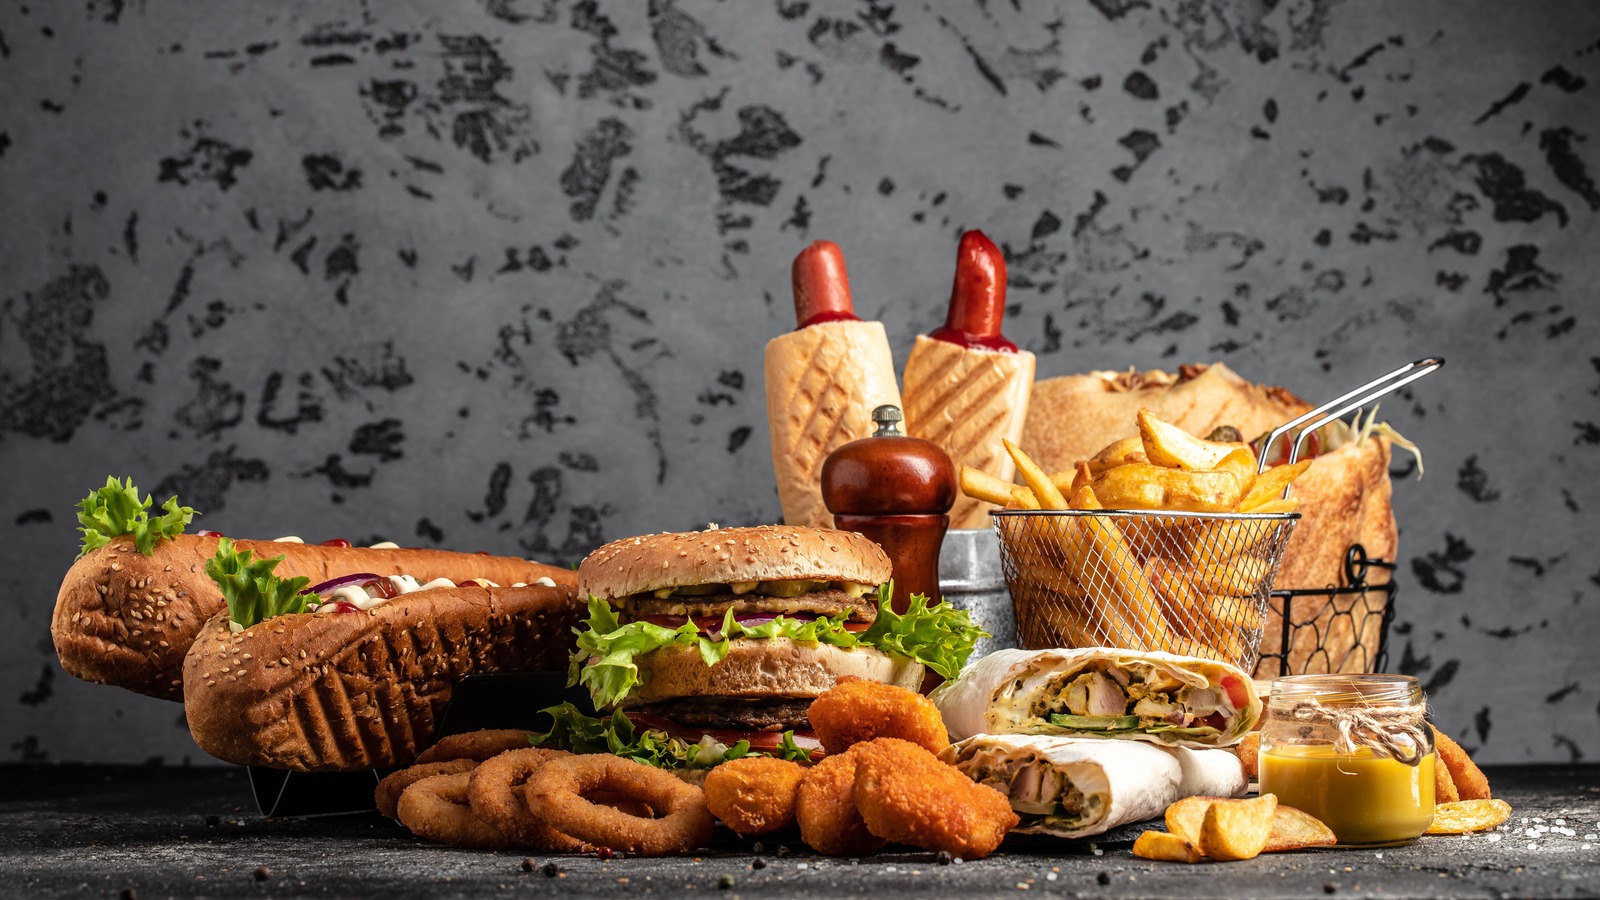 Fastfood - Fast Food Restaurants You Should Try 1